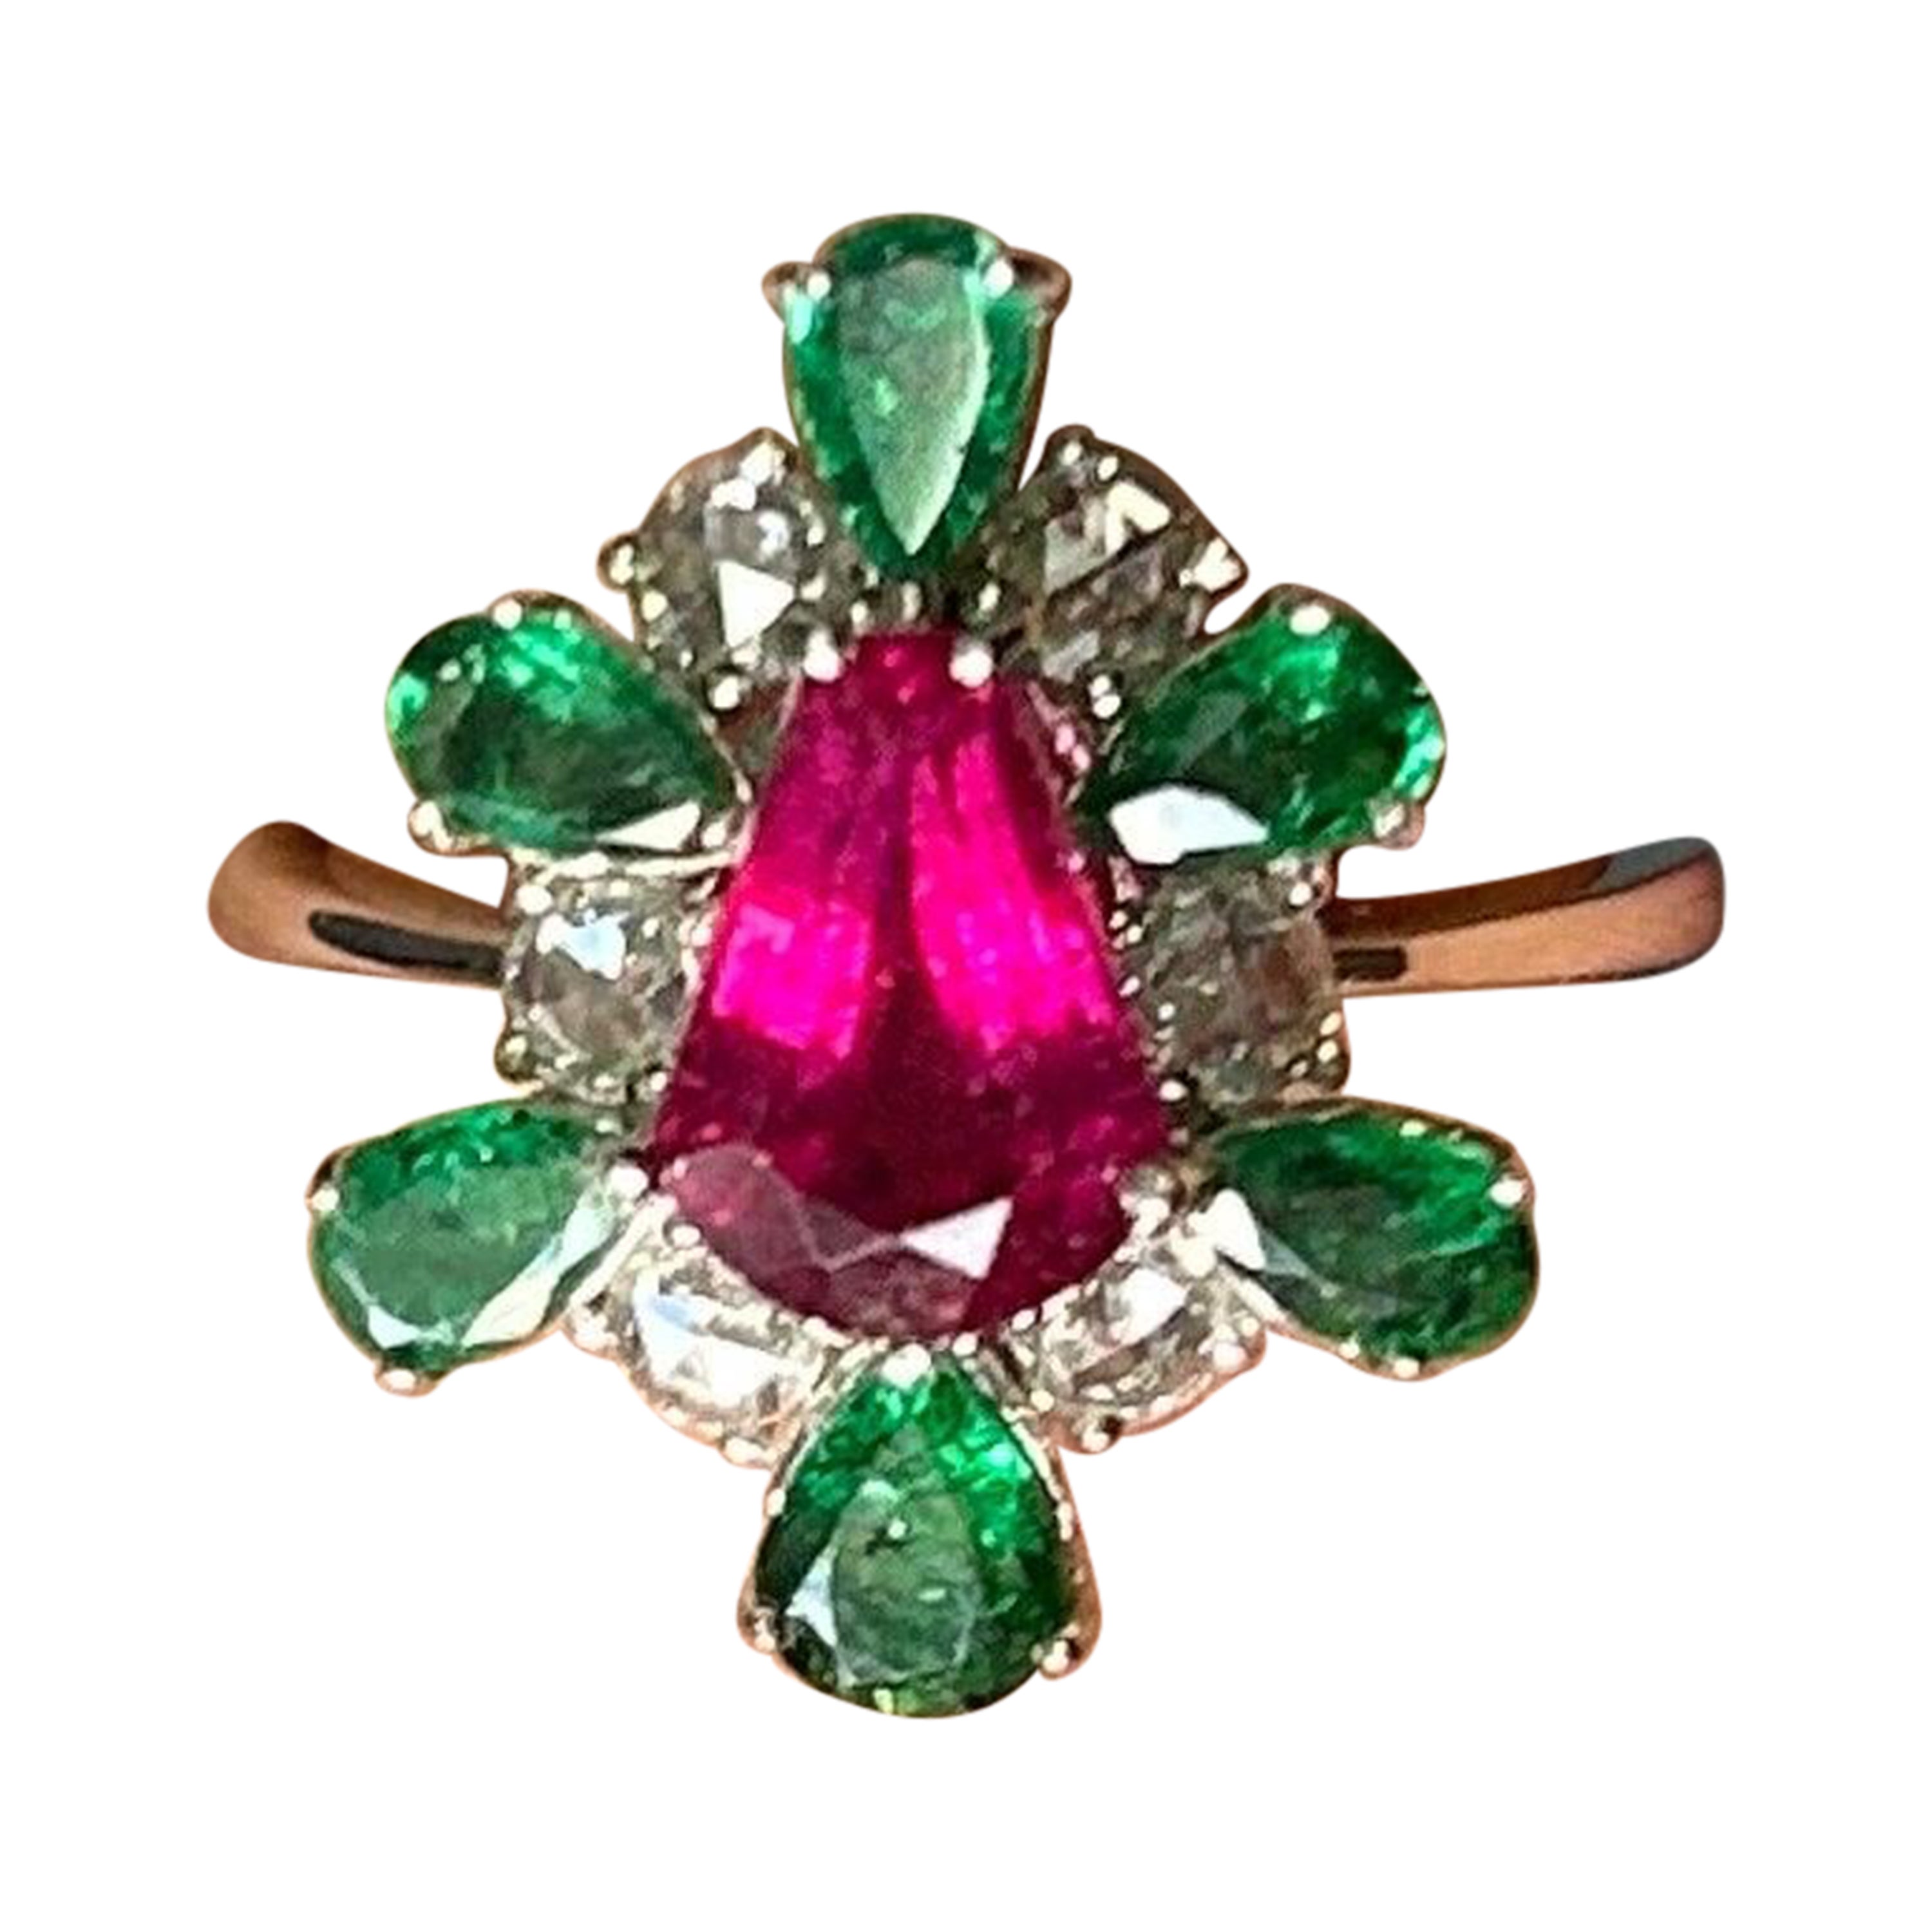 Certified 1.43 Carat Mozambique Ruby and Emerald Cocktail Engagement Ring